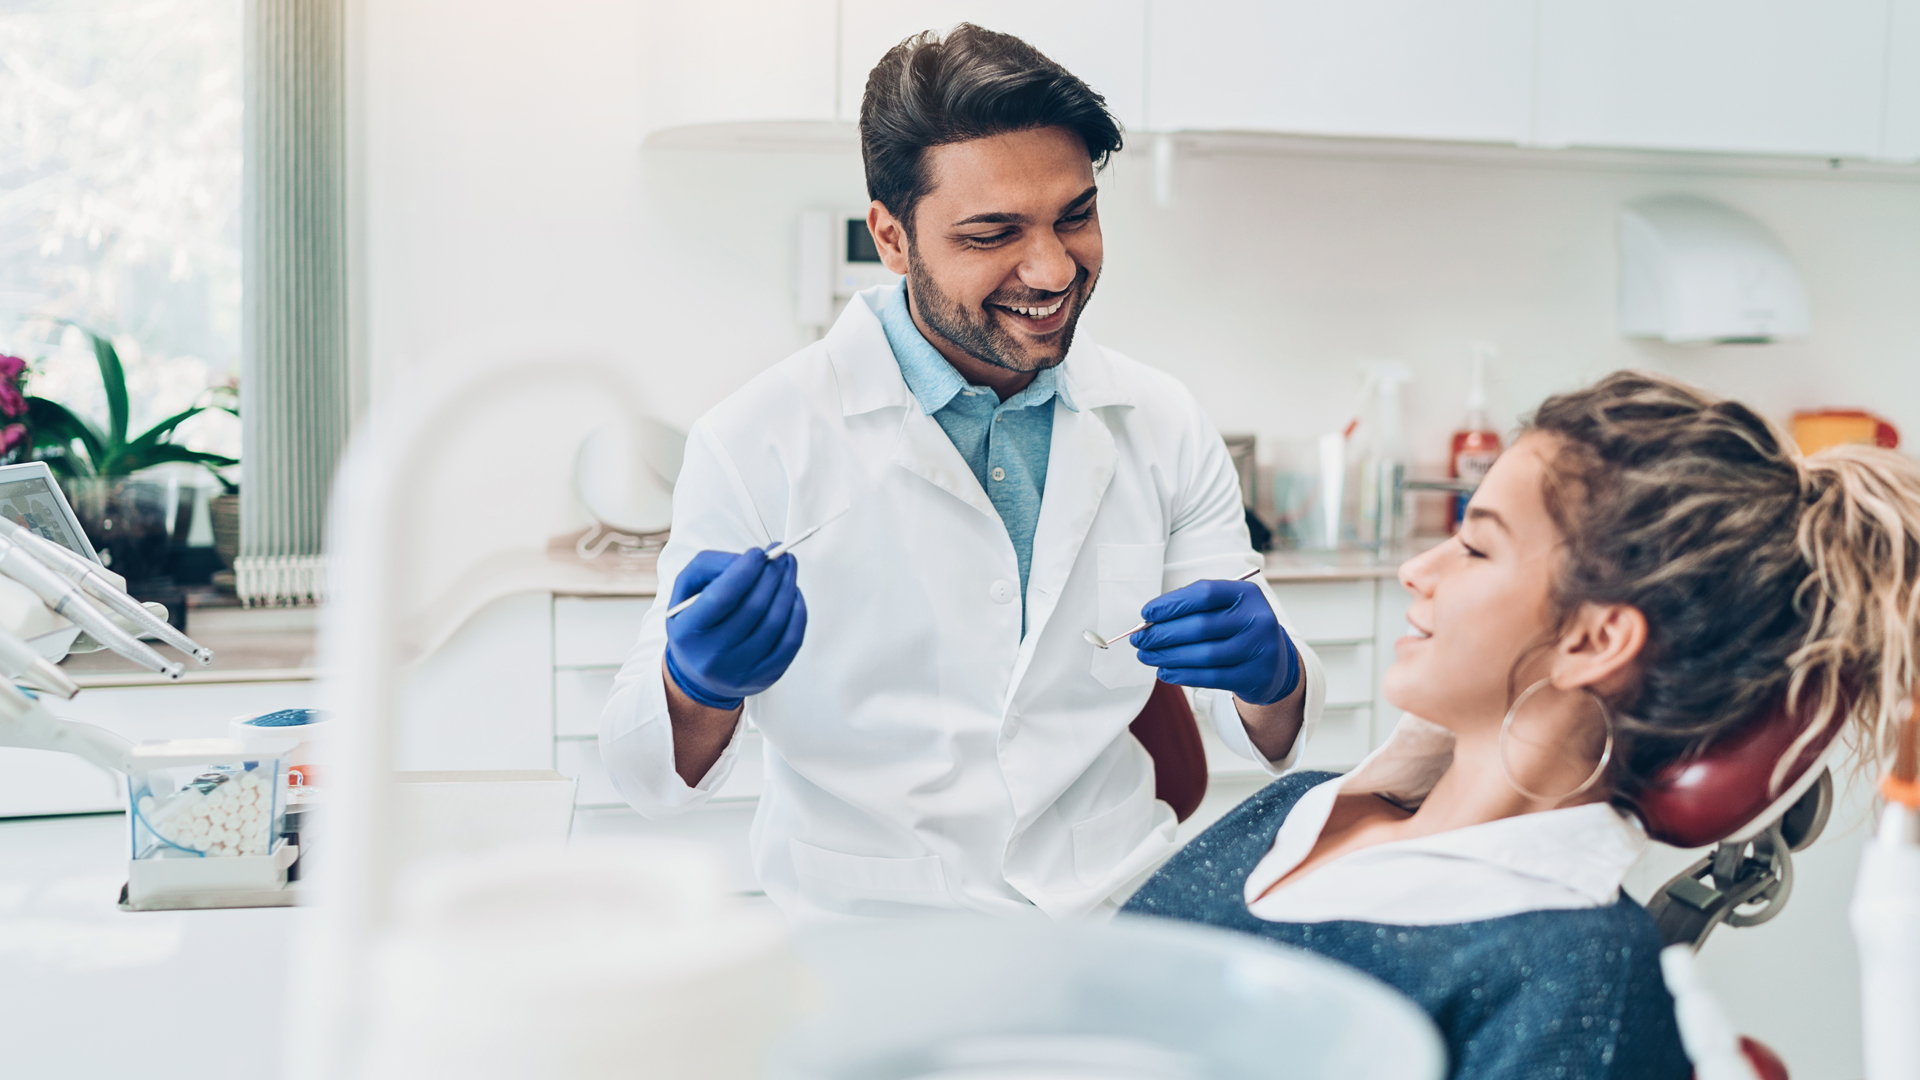 New research explores infection control changes in dentistry